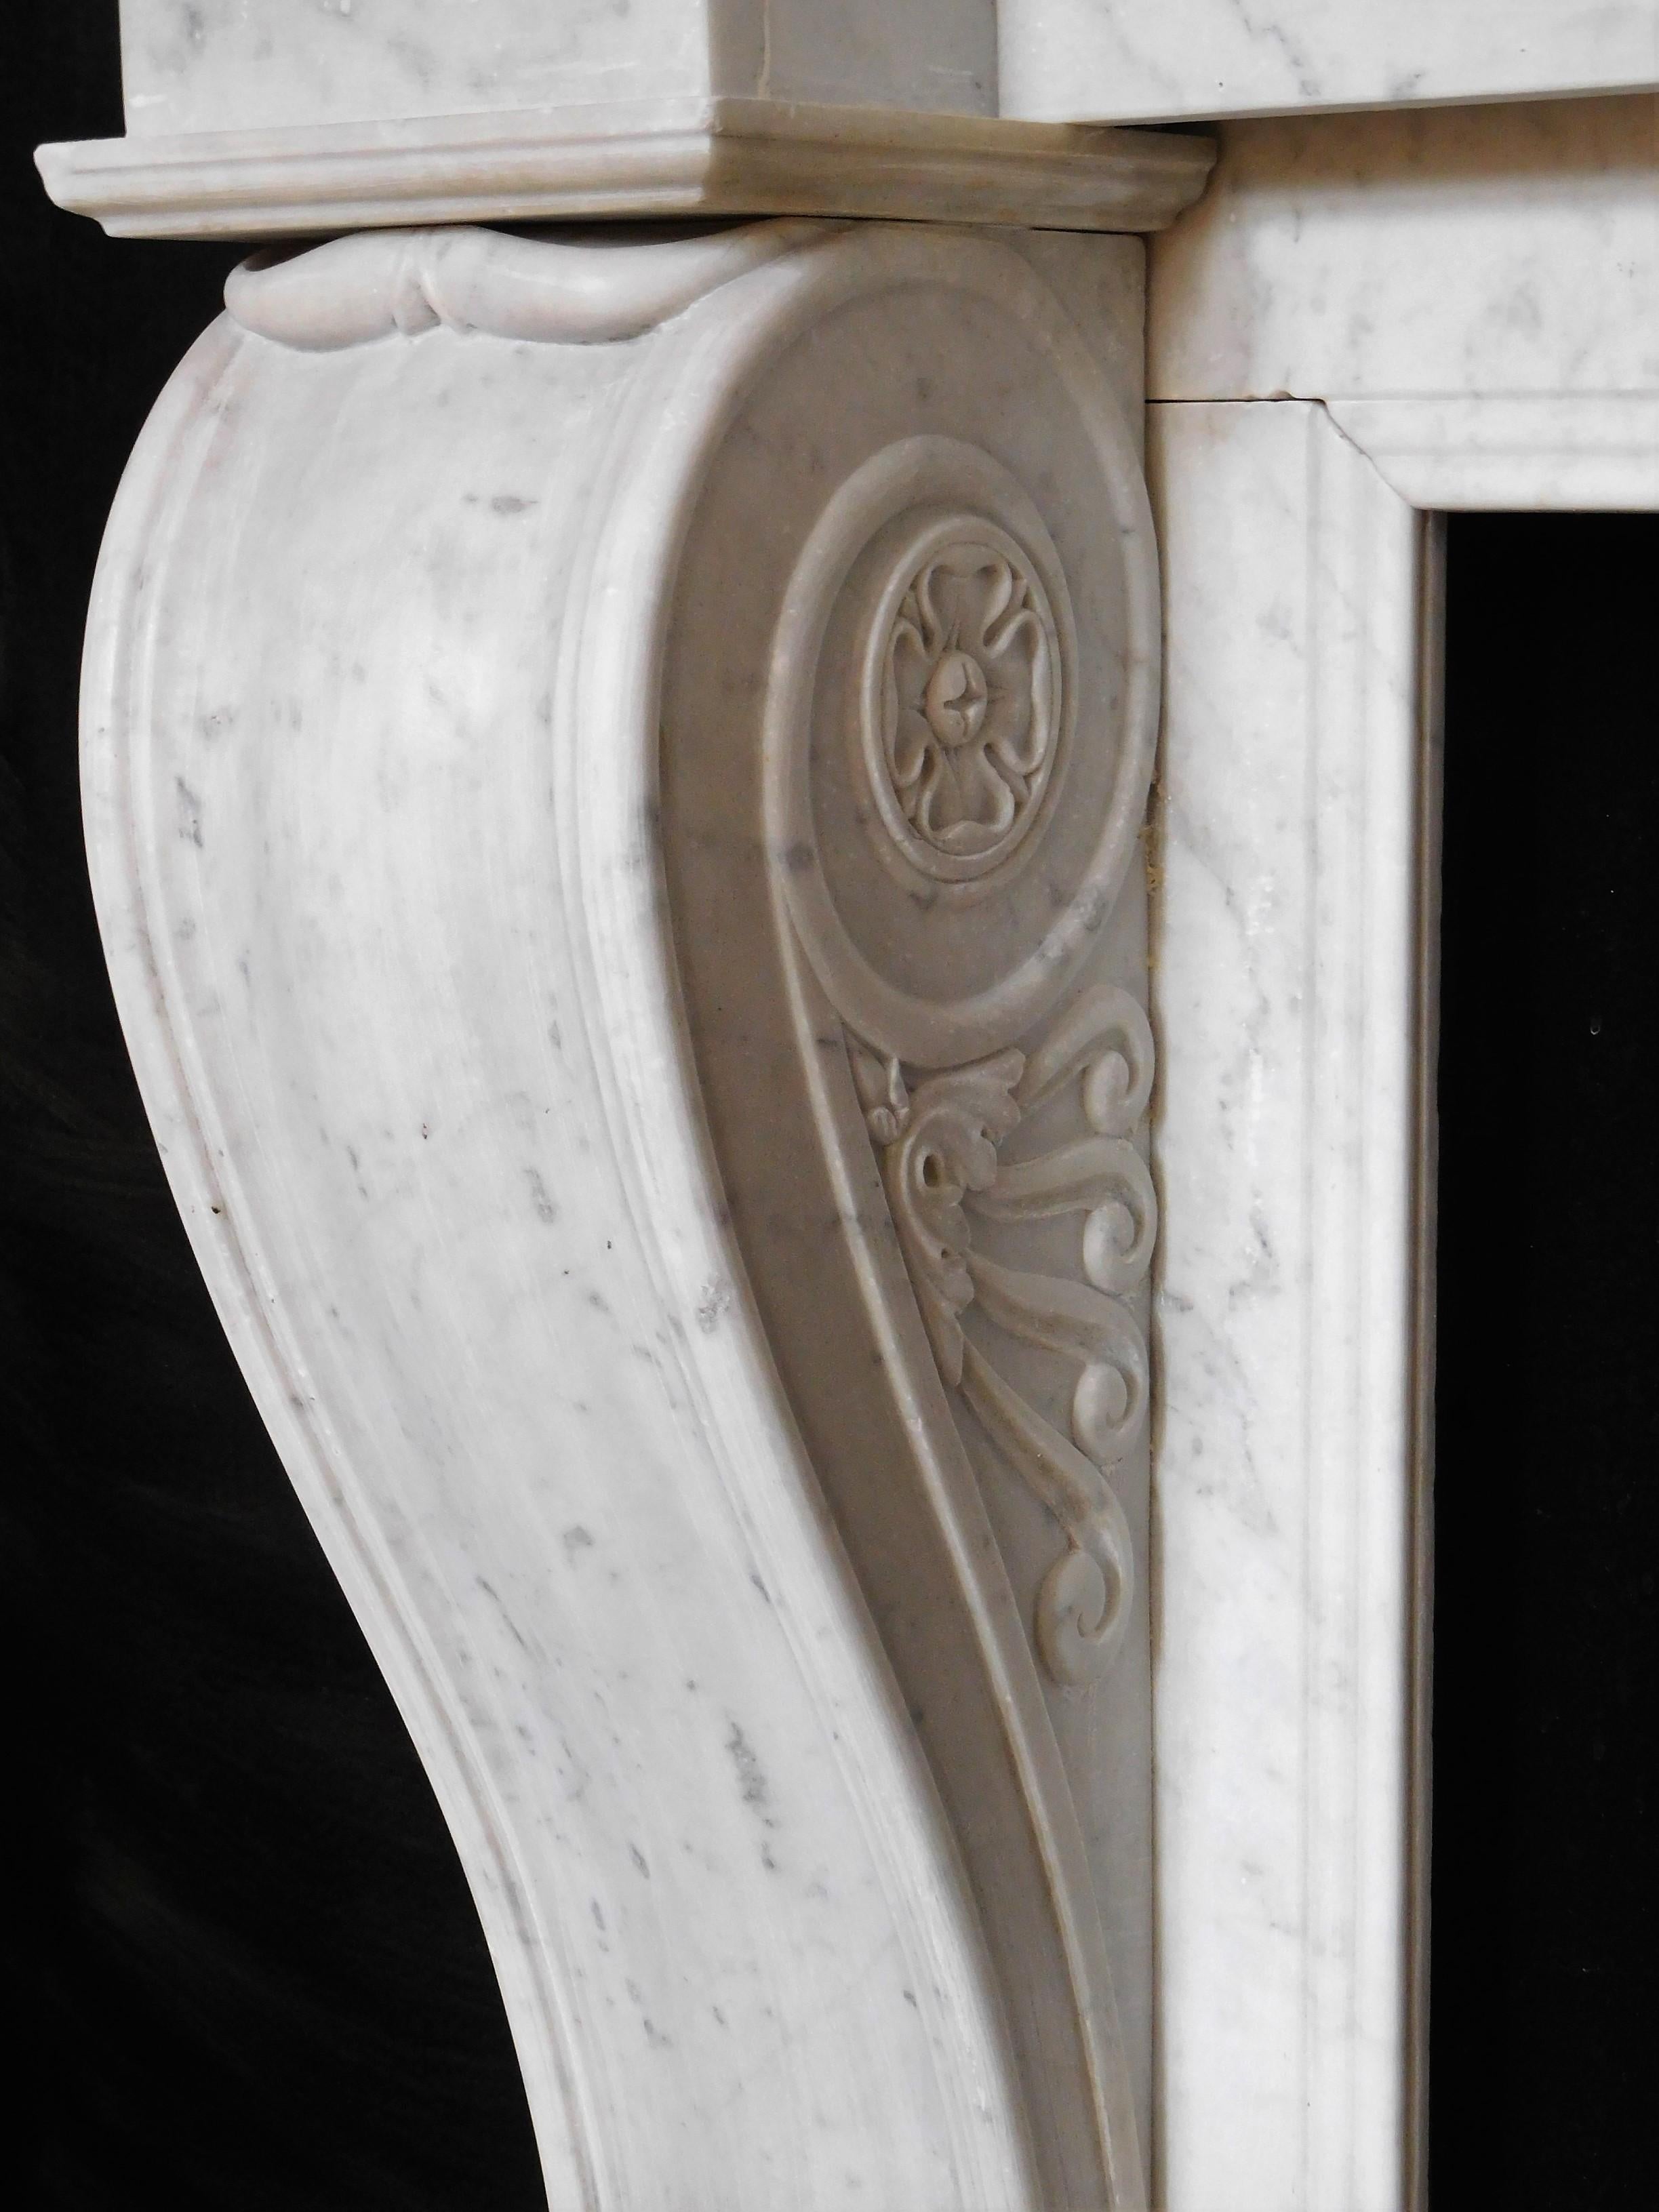 An imposing and beautiful Empire II fireplace, very, very nicely carved in subtly veined Carrara Marble.
This marble has a semi-statuary quality which adds a distinct shine and raffinée.
Origin: a Maison Maitre, centre Brussels. This fireplace,